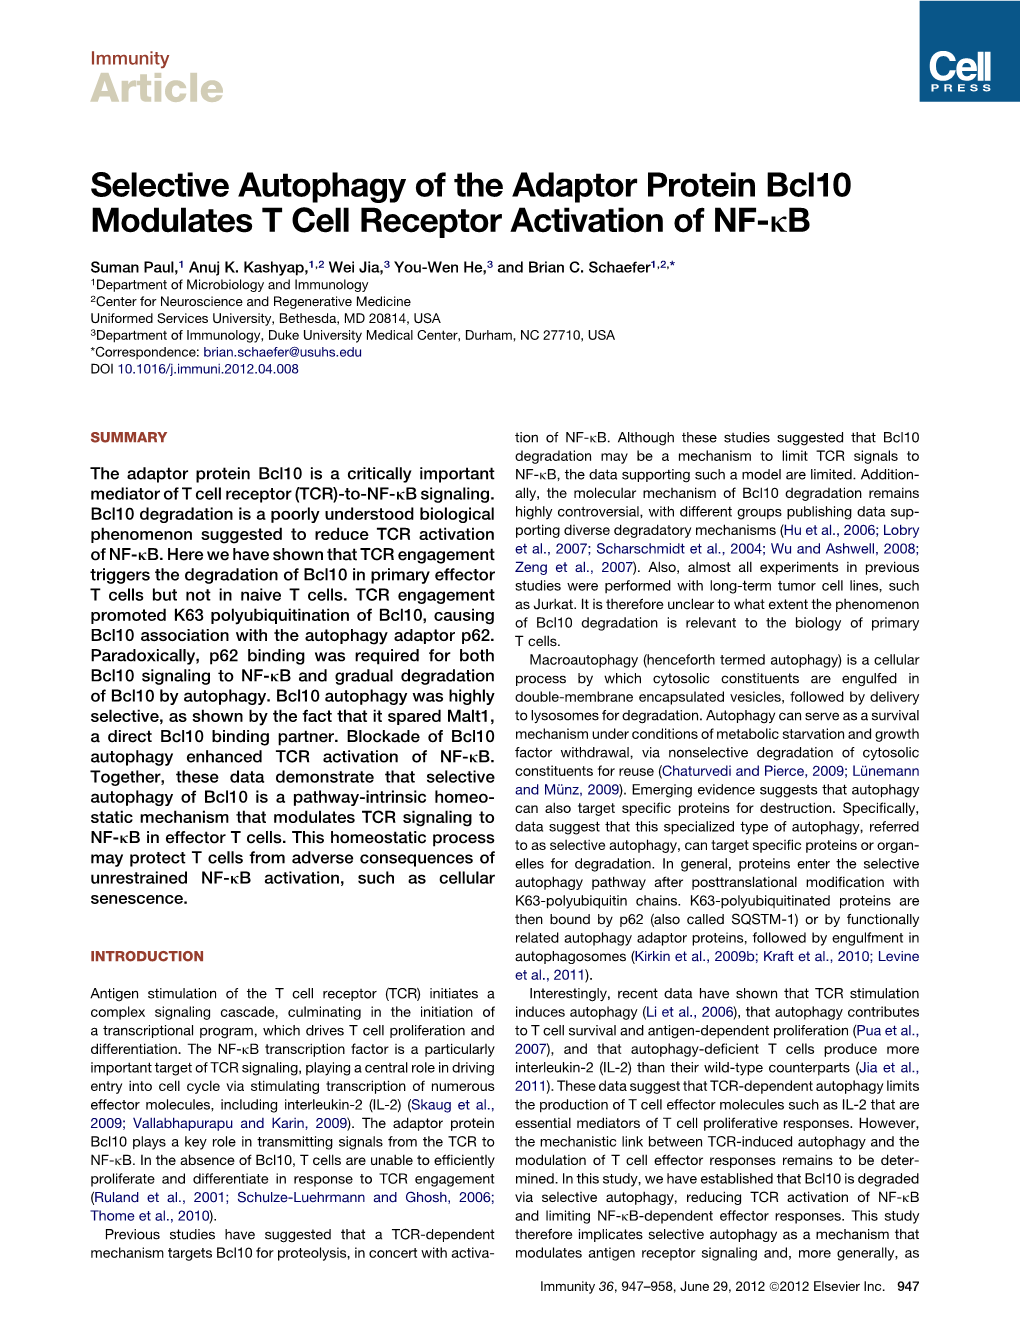 Selective Autophagy of the Adaptor Protein Bcl10 Modulates T Cell Receptor Activation of NF-Kb